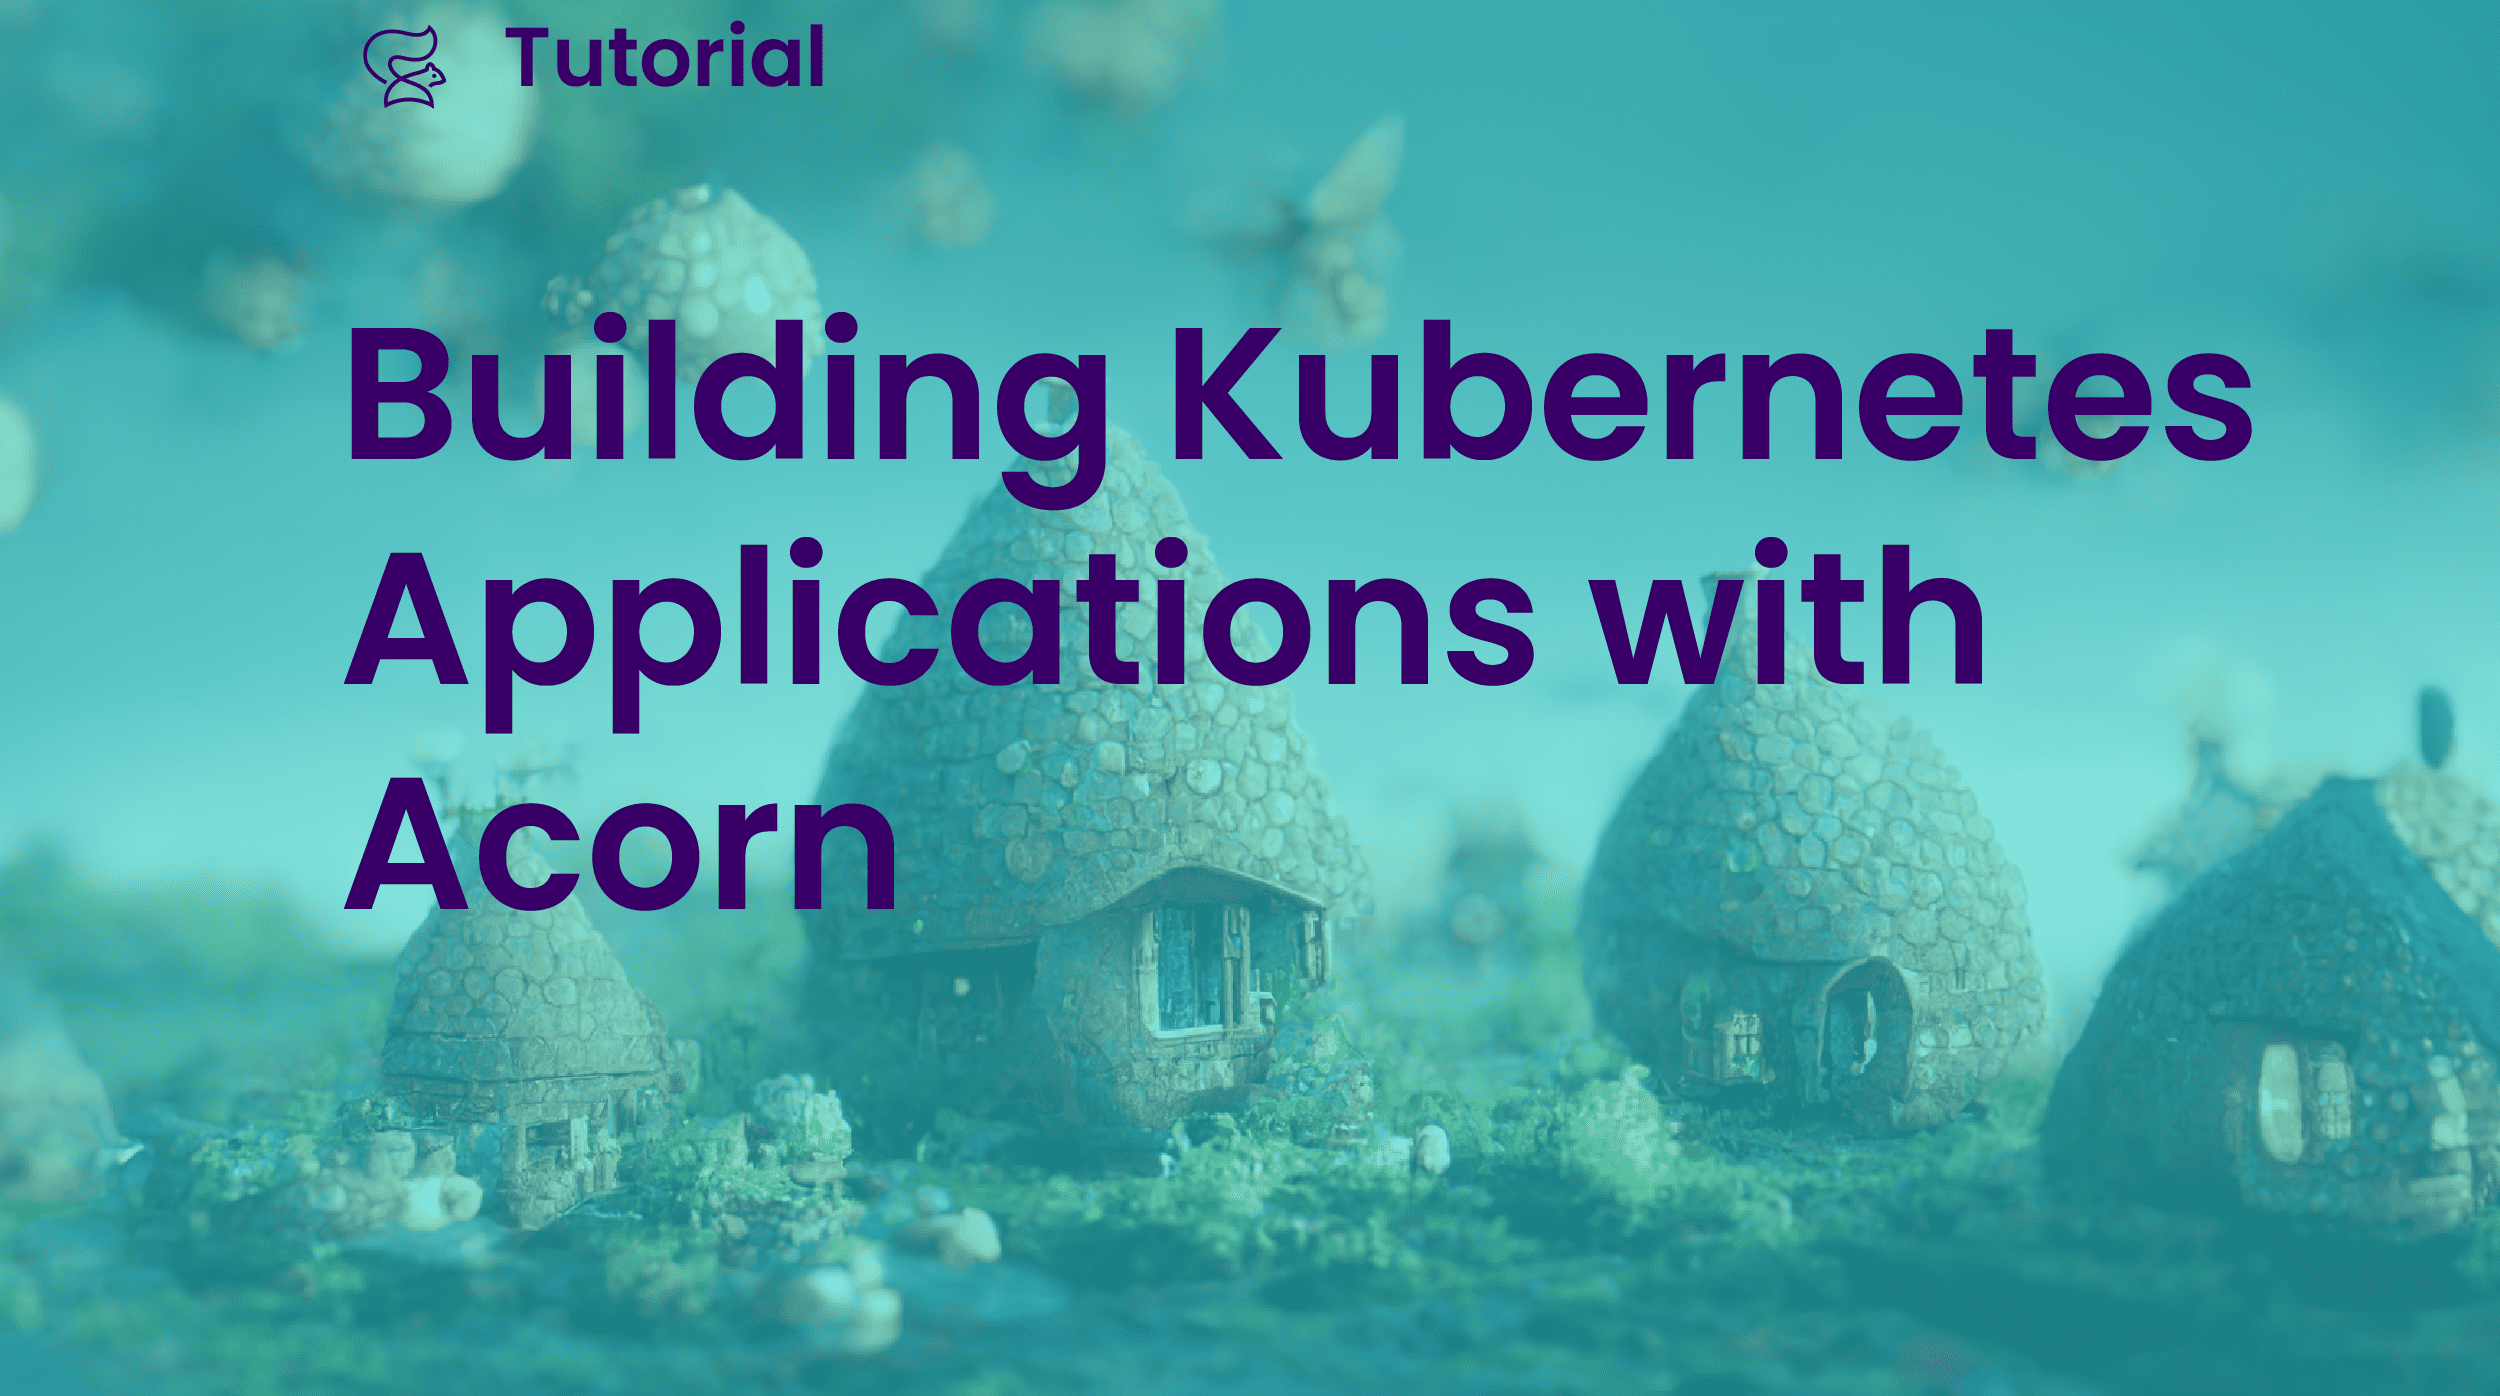 Building Kubernetes Applications with Acorn